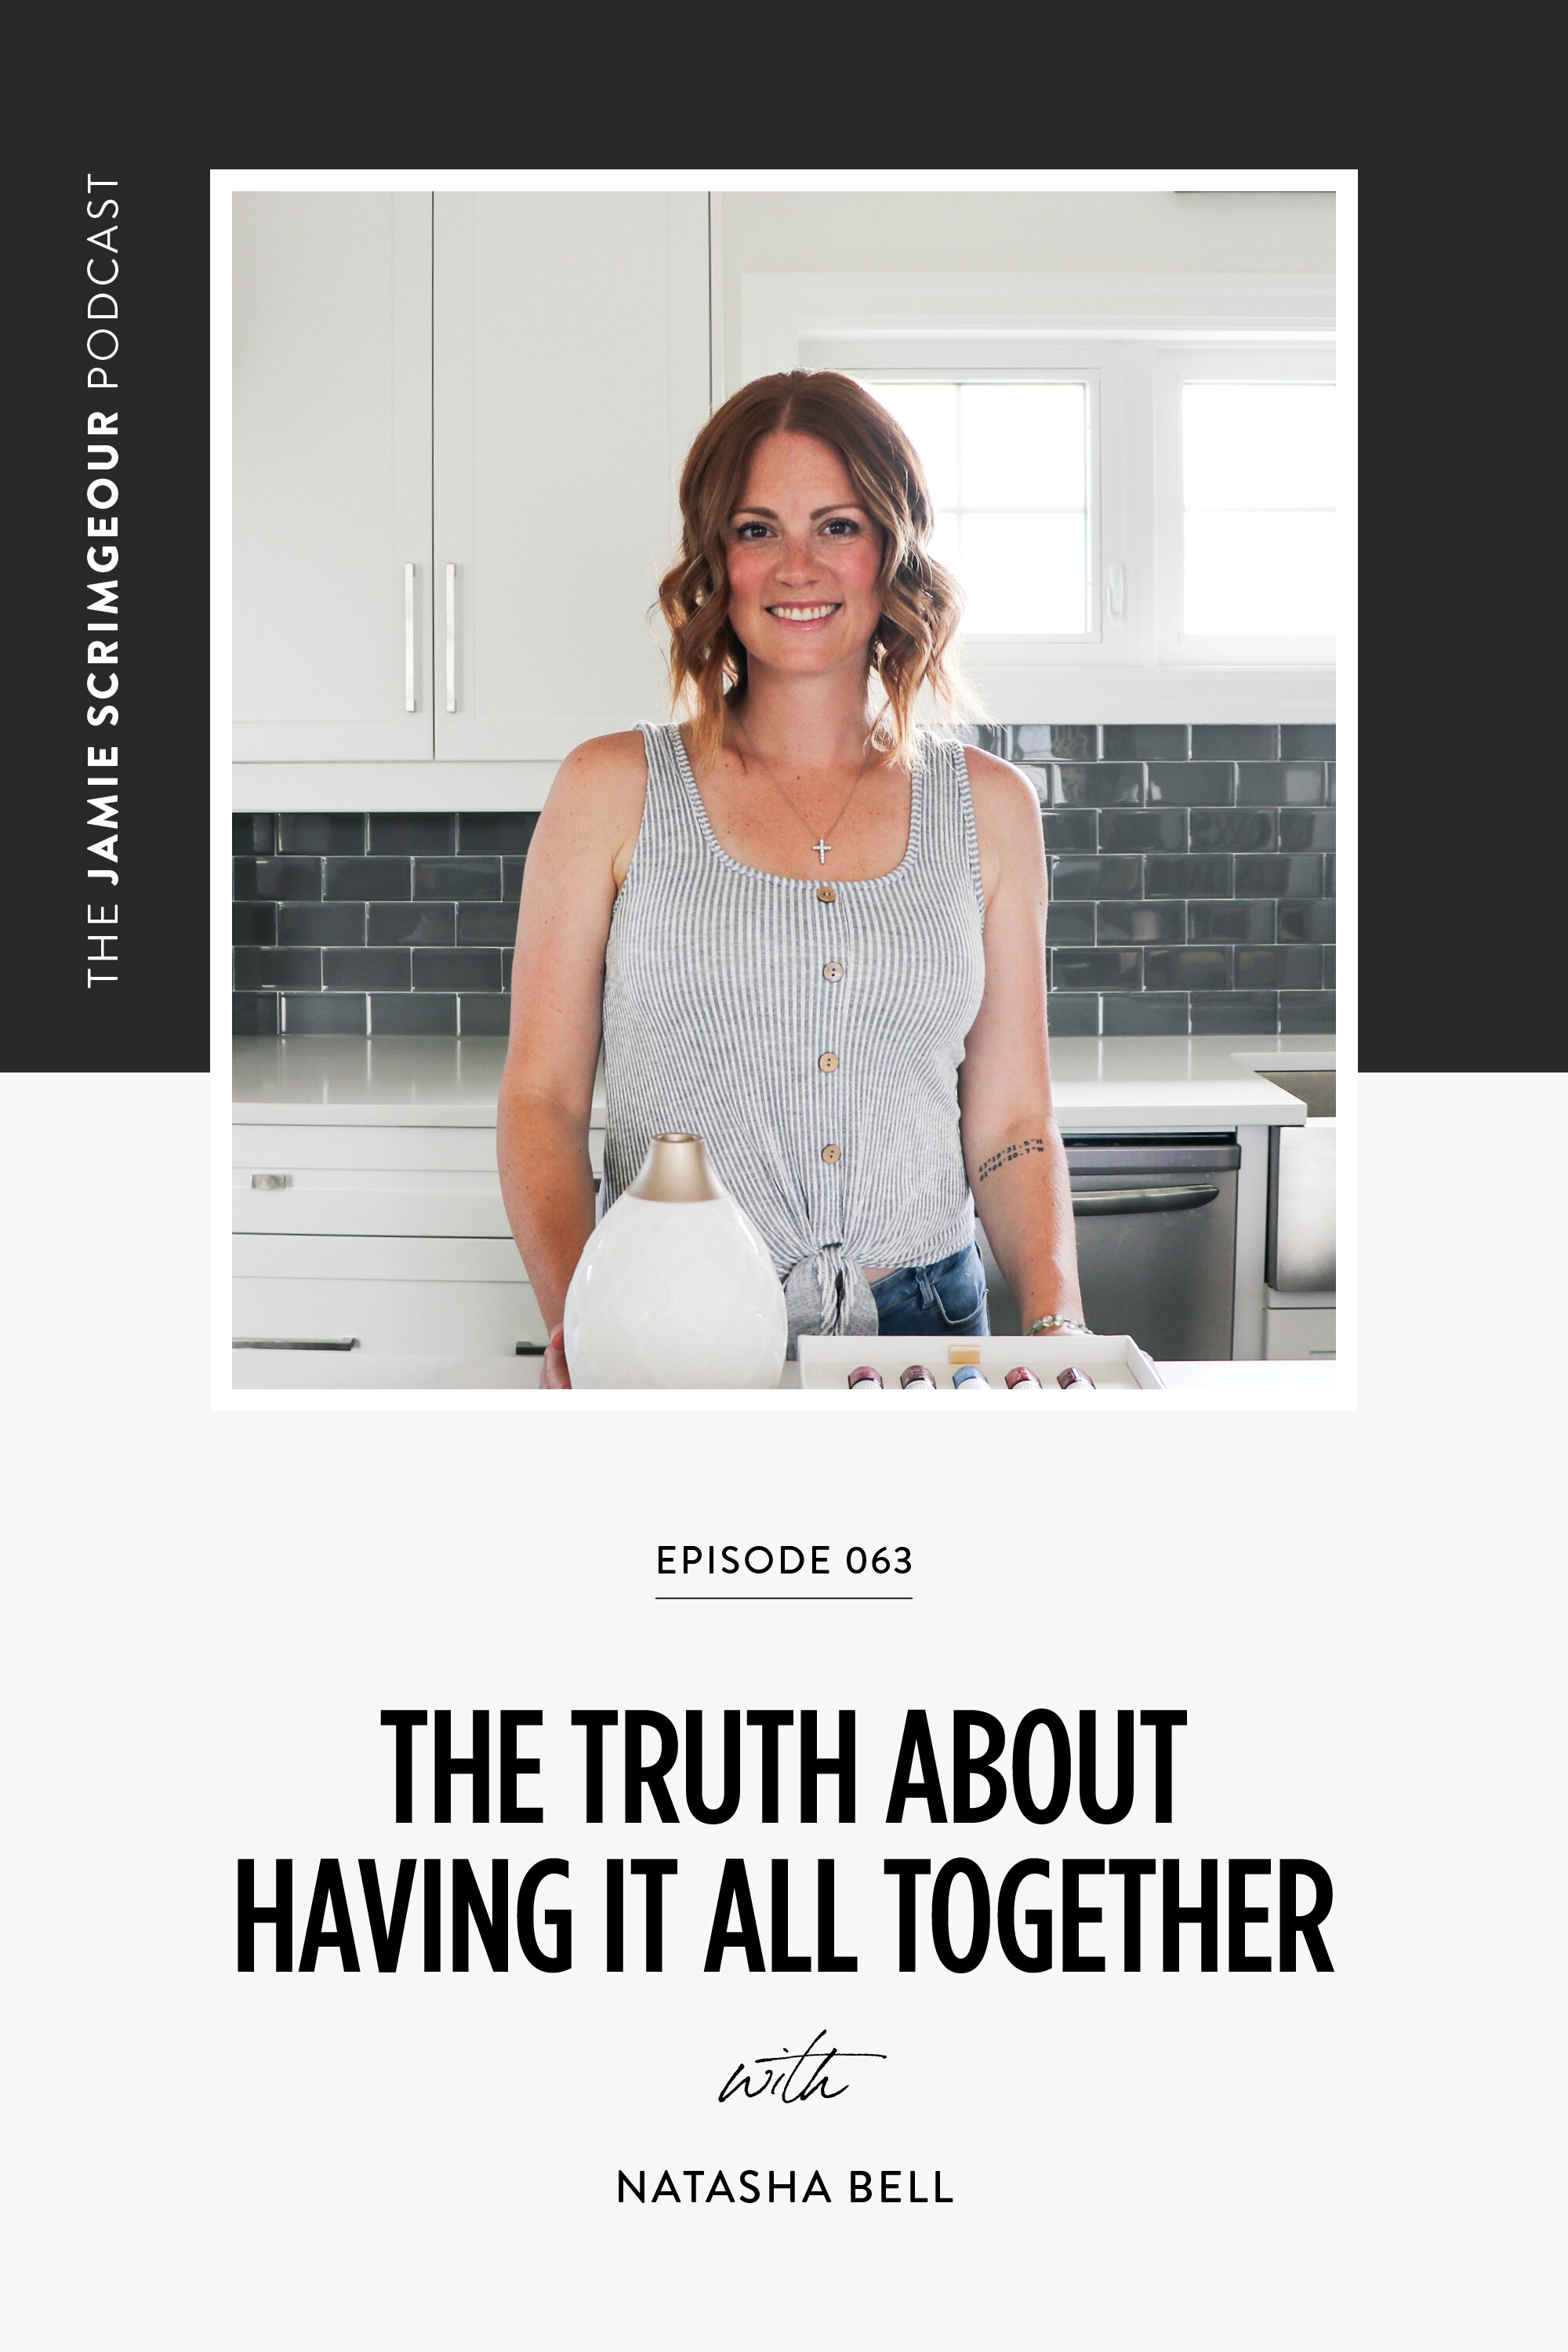 The Jamie Scrimgeour Podcast Episode 066 - The Truth About Having It All Together with Natasha Bell